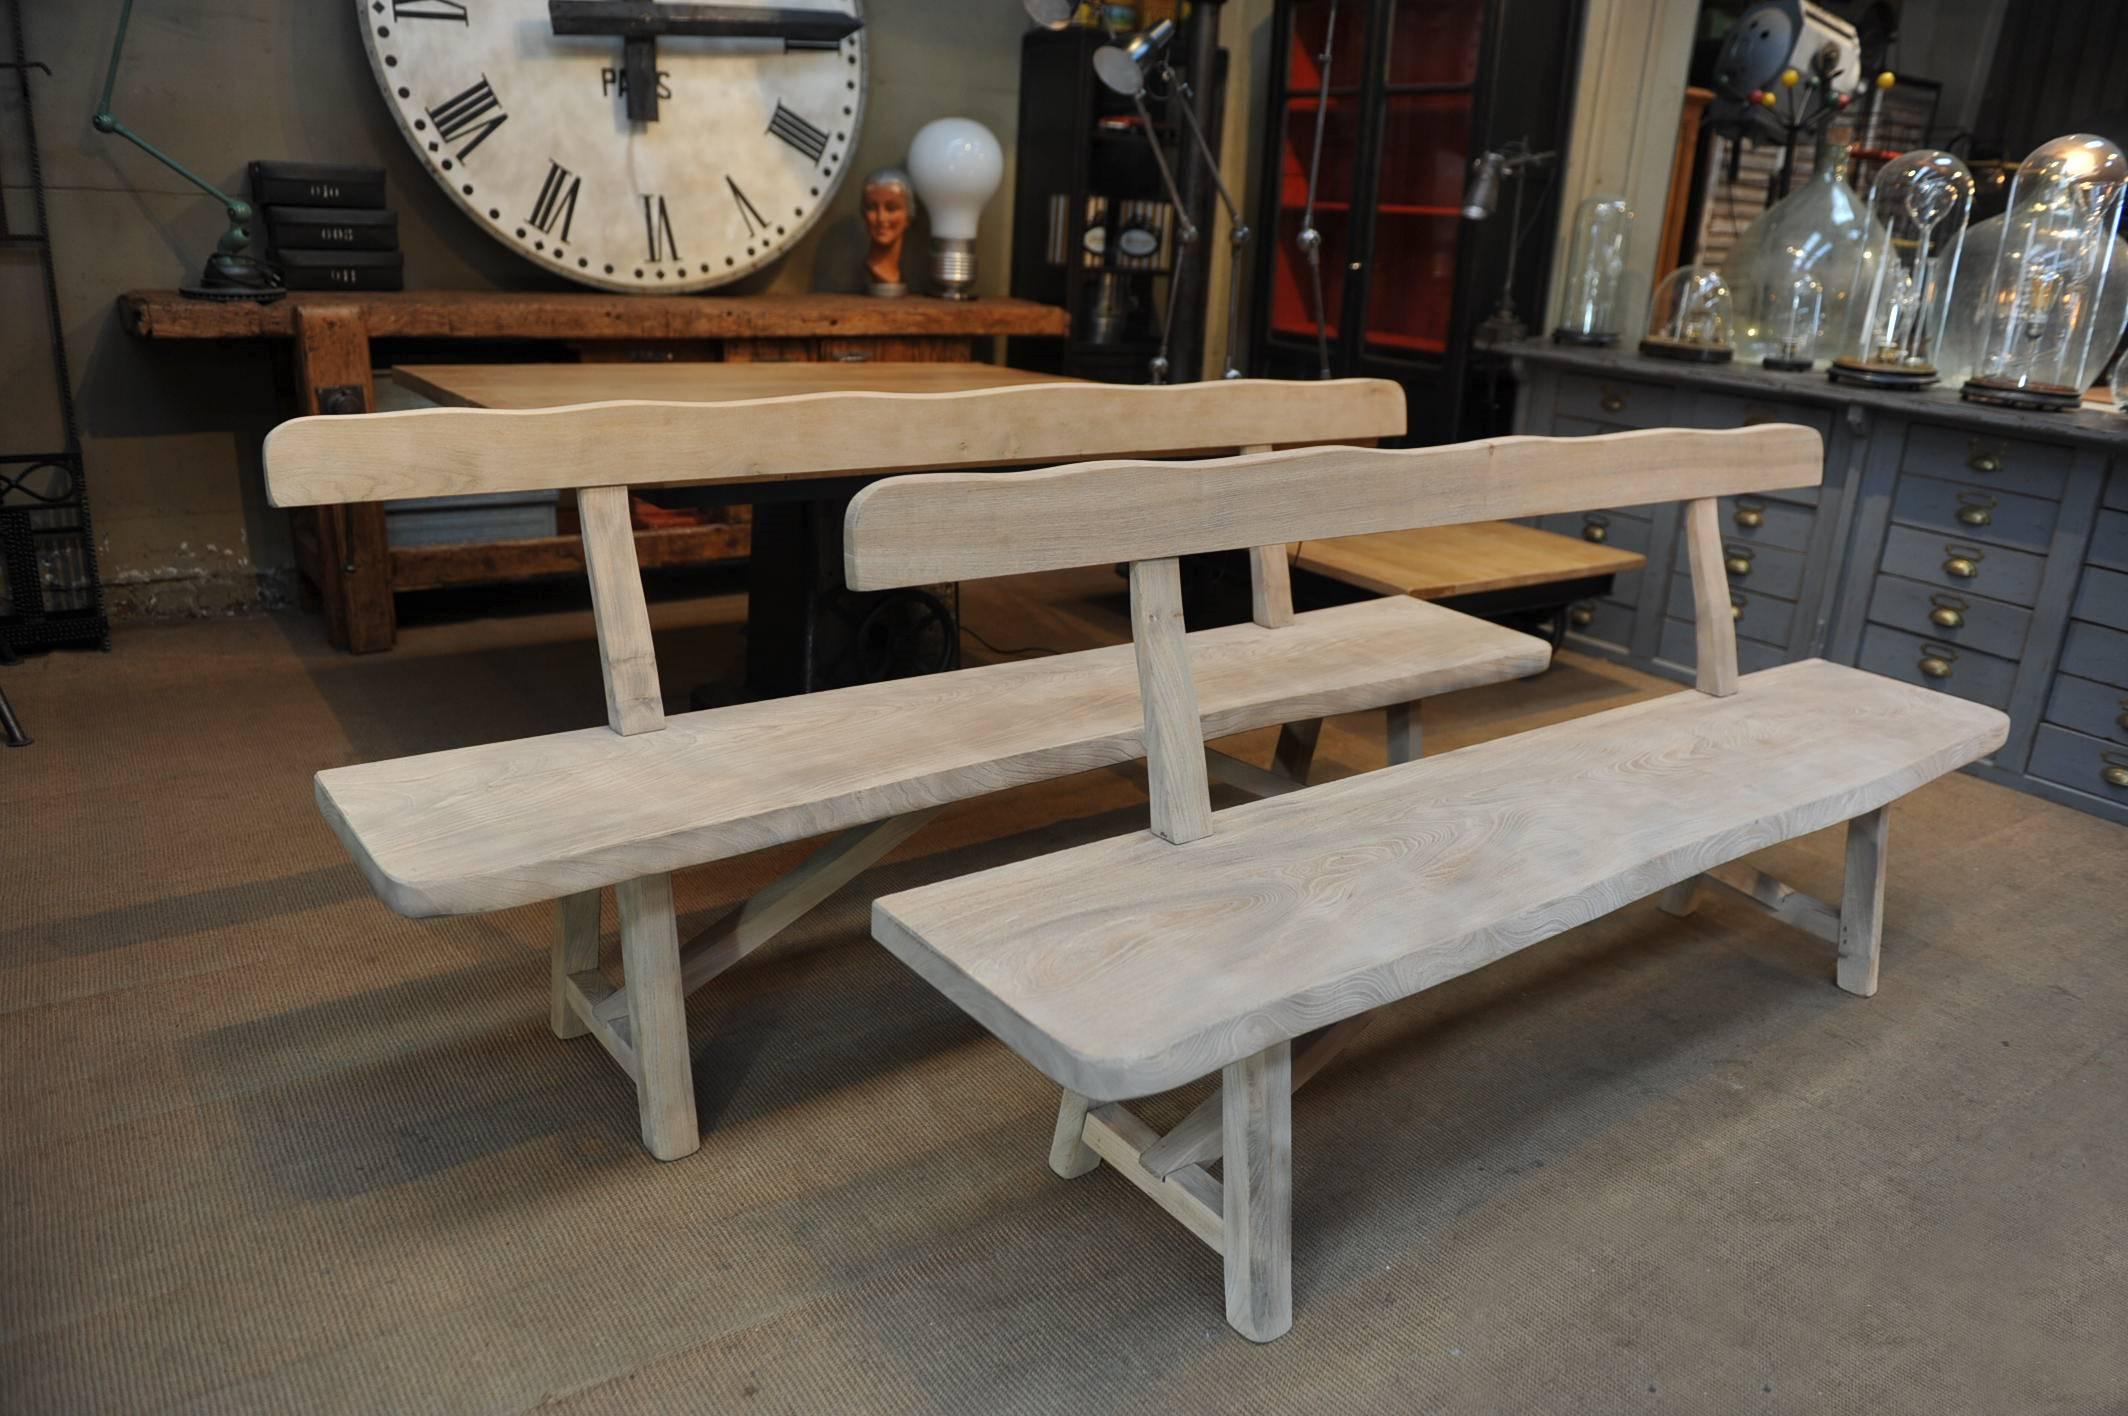 Pair of mid century design natural send elm wood bench by Olavi Hanninen, 1950s. Very stable and excellent condition.
